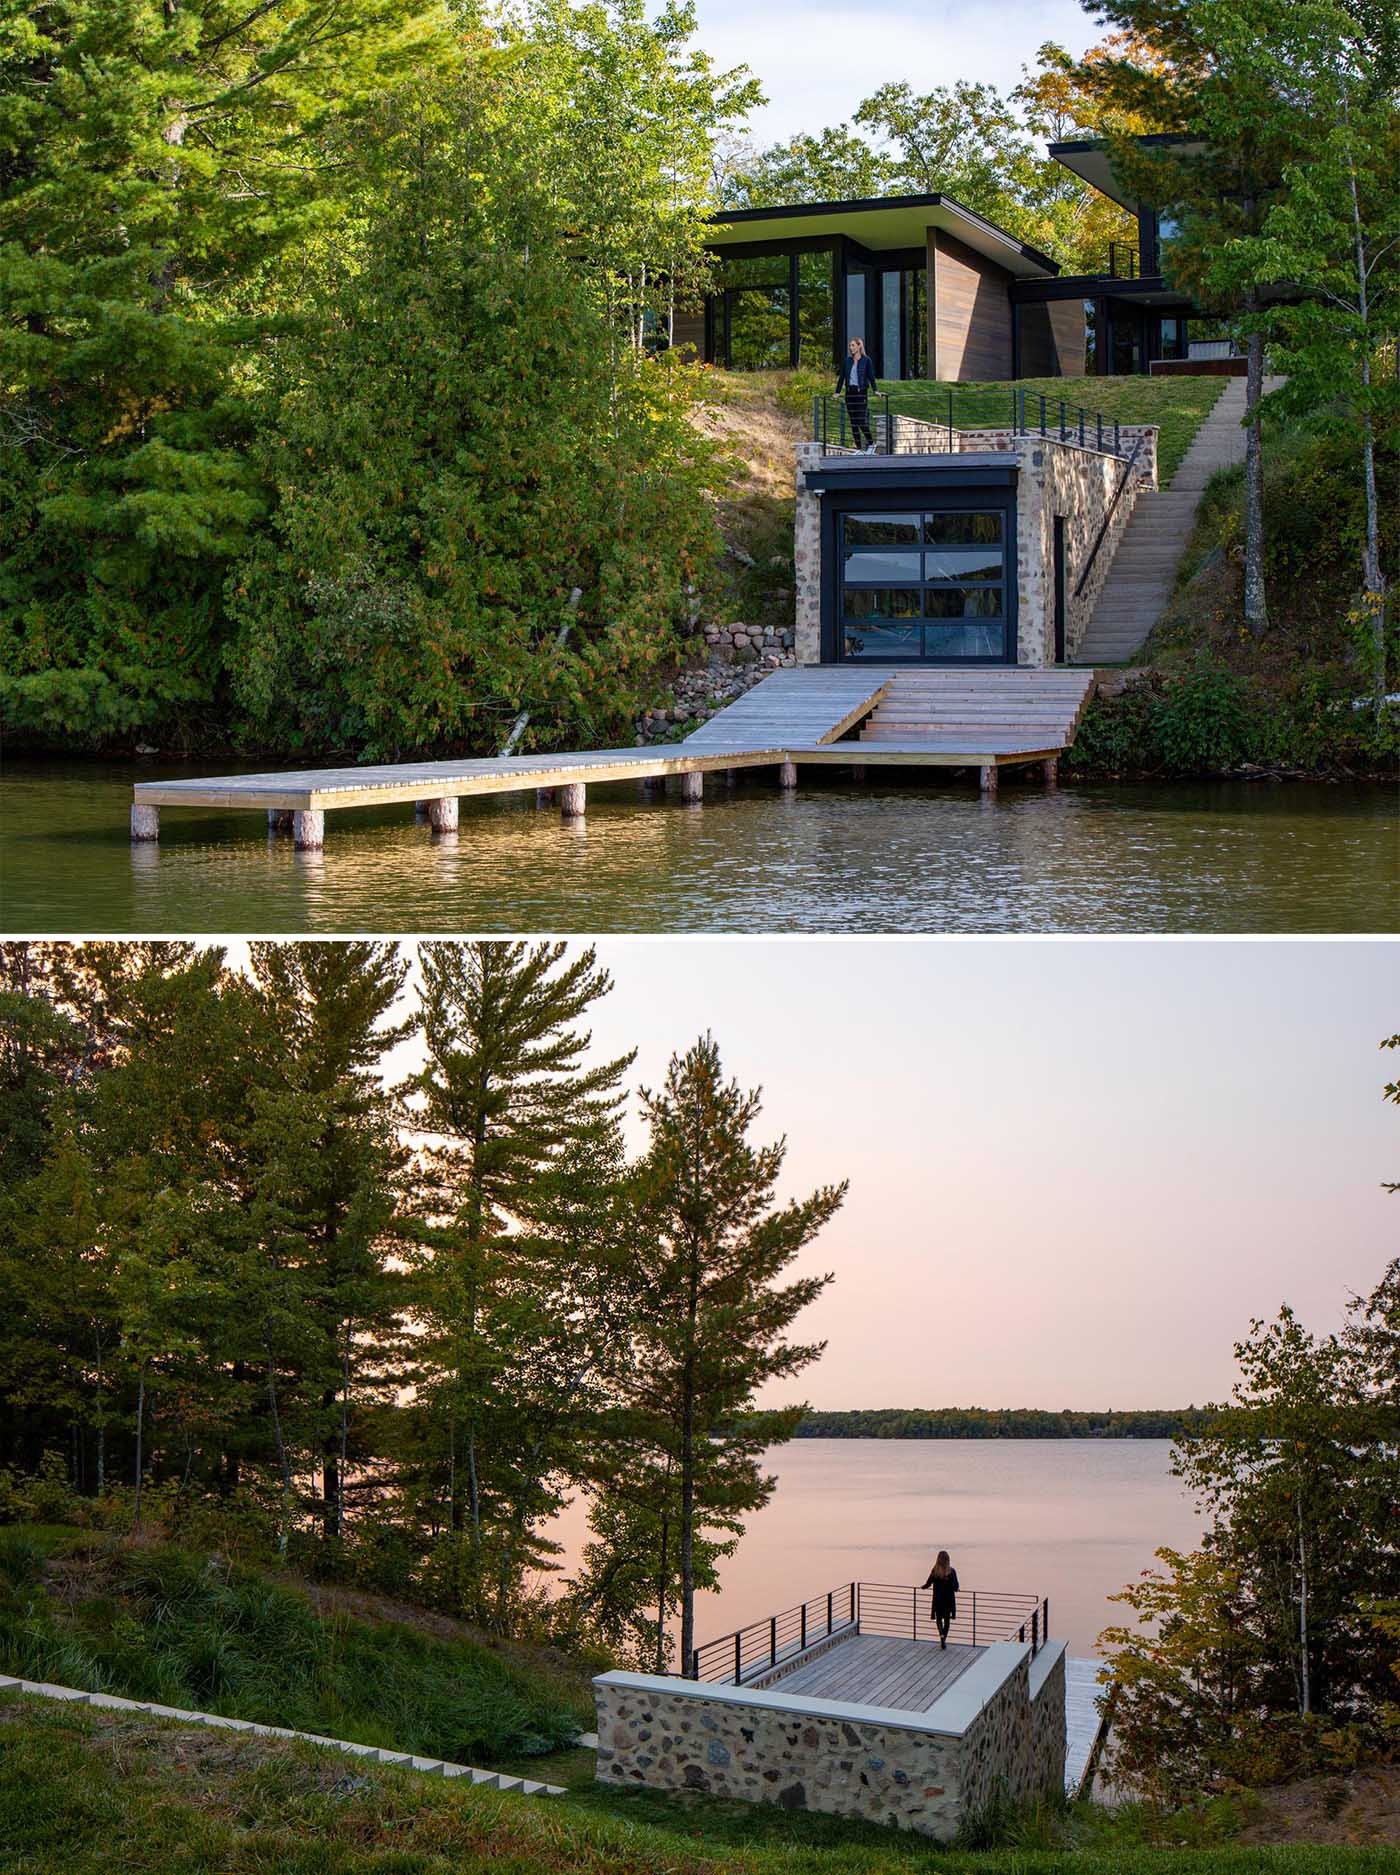 This modern home includes steps that lead down to a boathouse with a rooftop deck, as well as a dock.